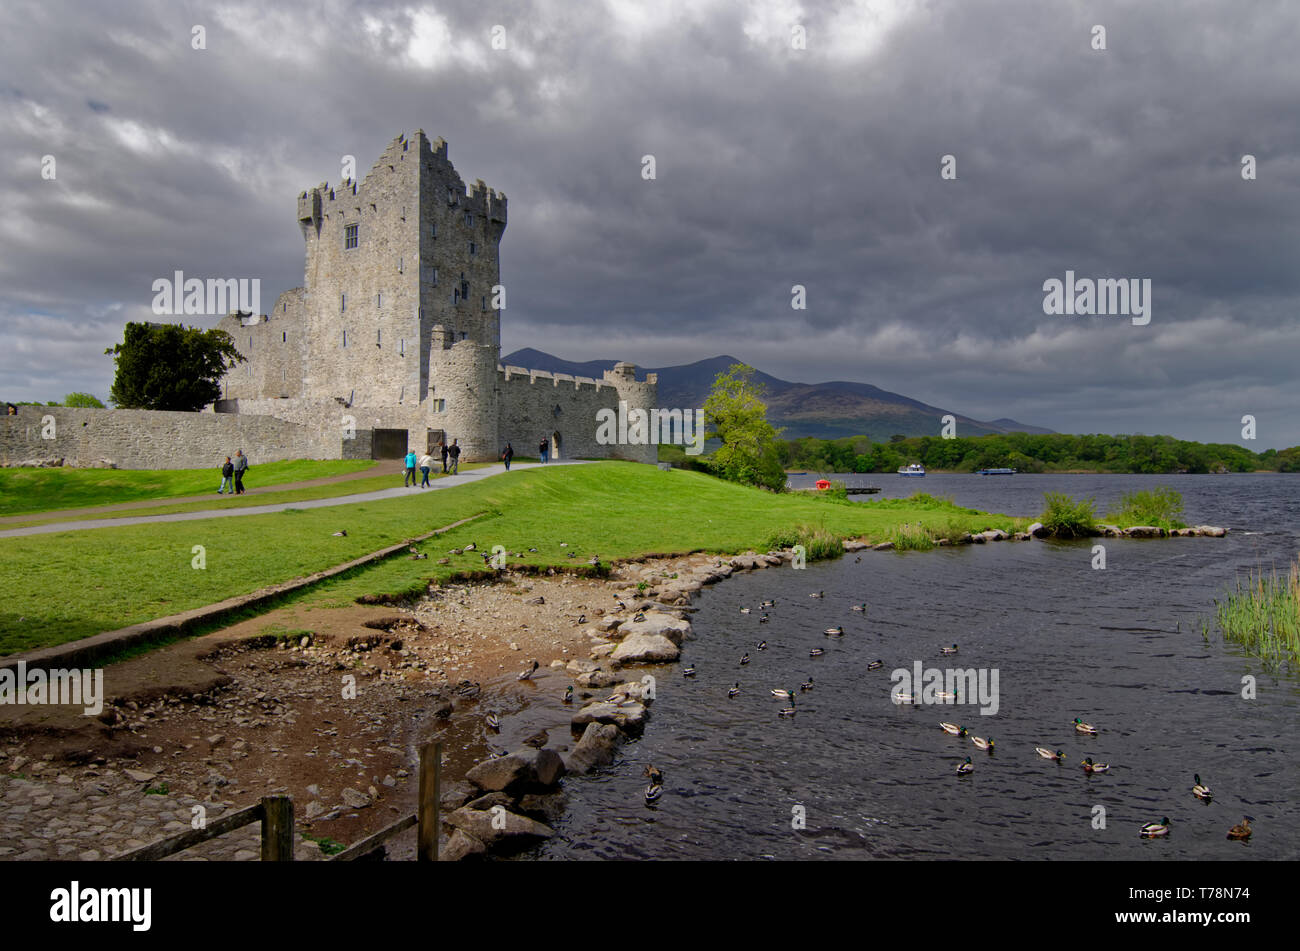 Ducks swimming in a stream next to Ross Castle, Killarney National Park, County Kerry, Ireland under a brooding grey sky Stock Photo